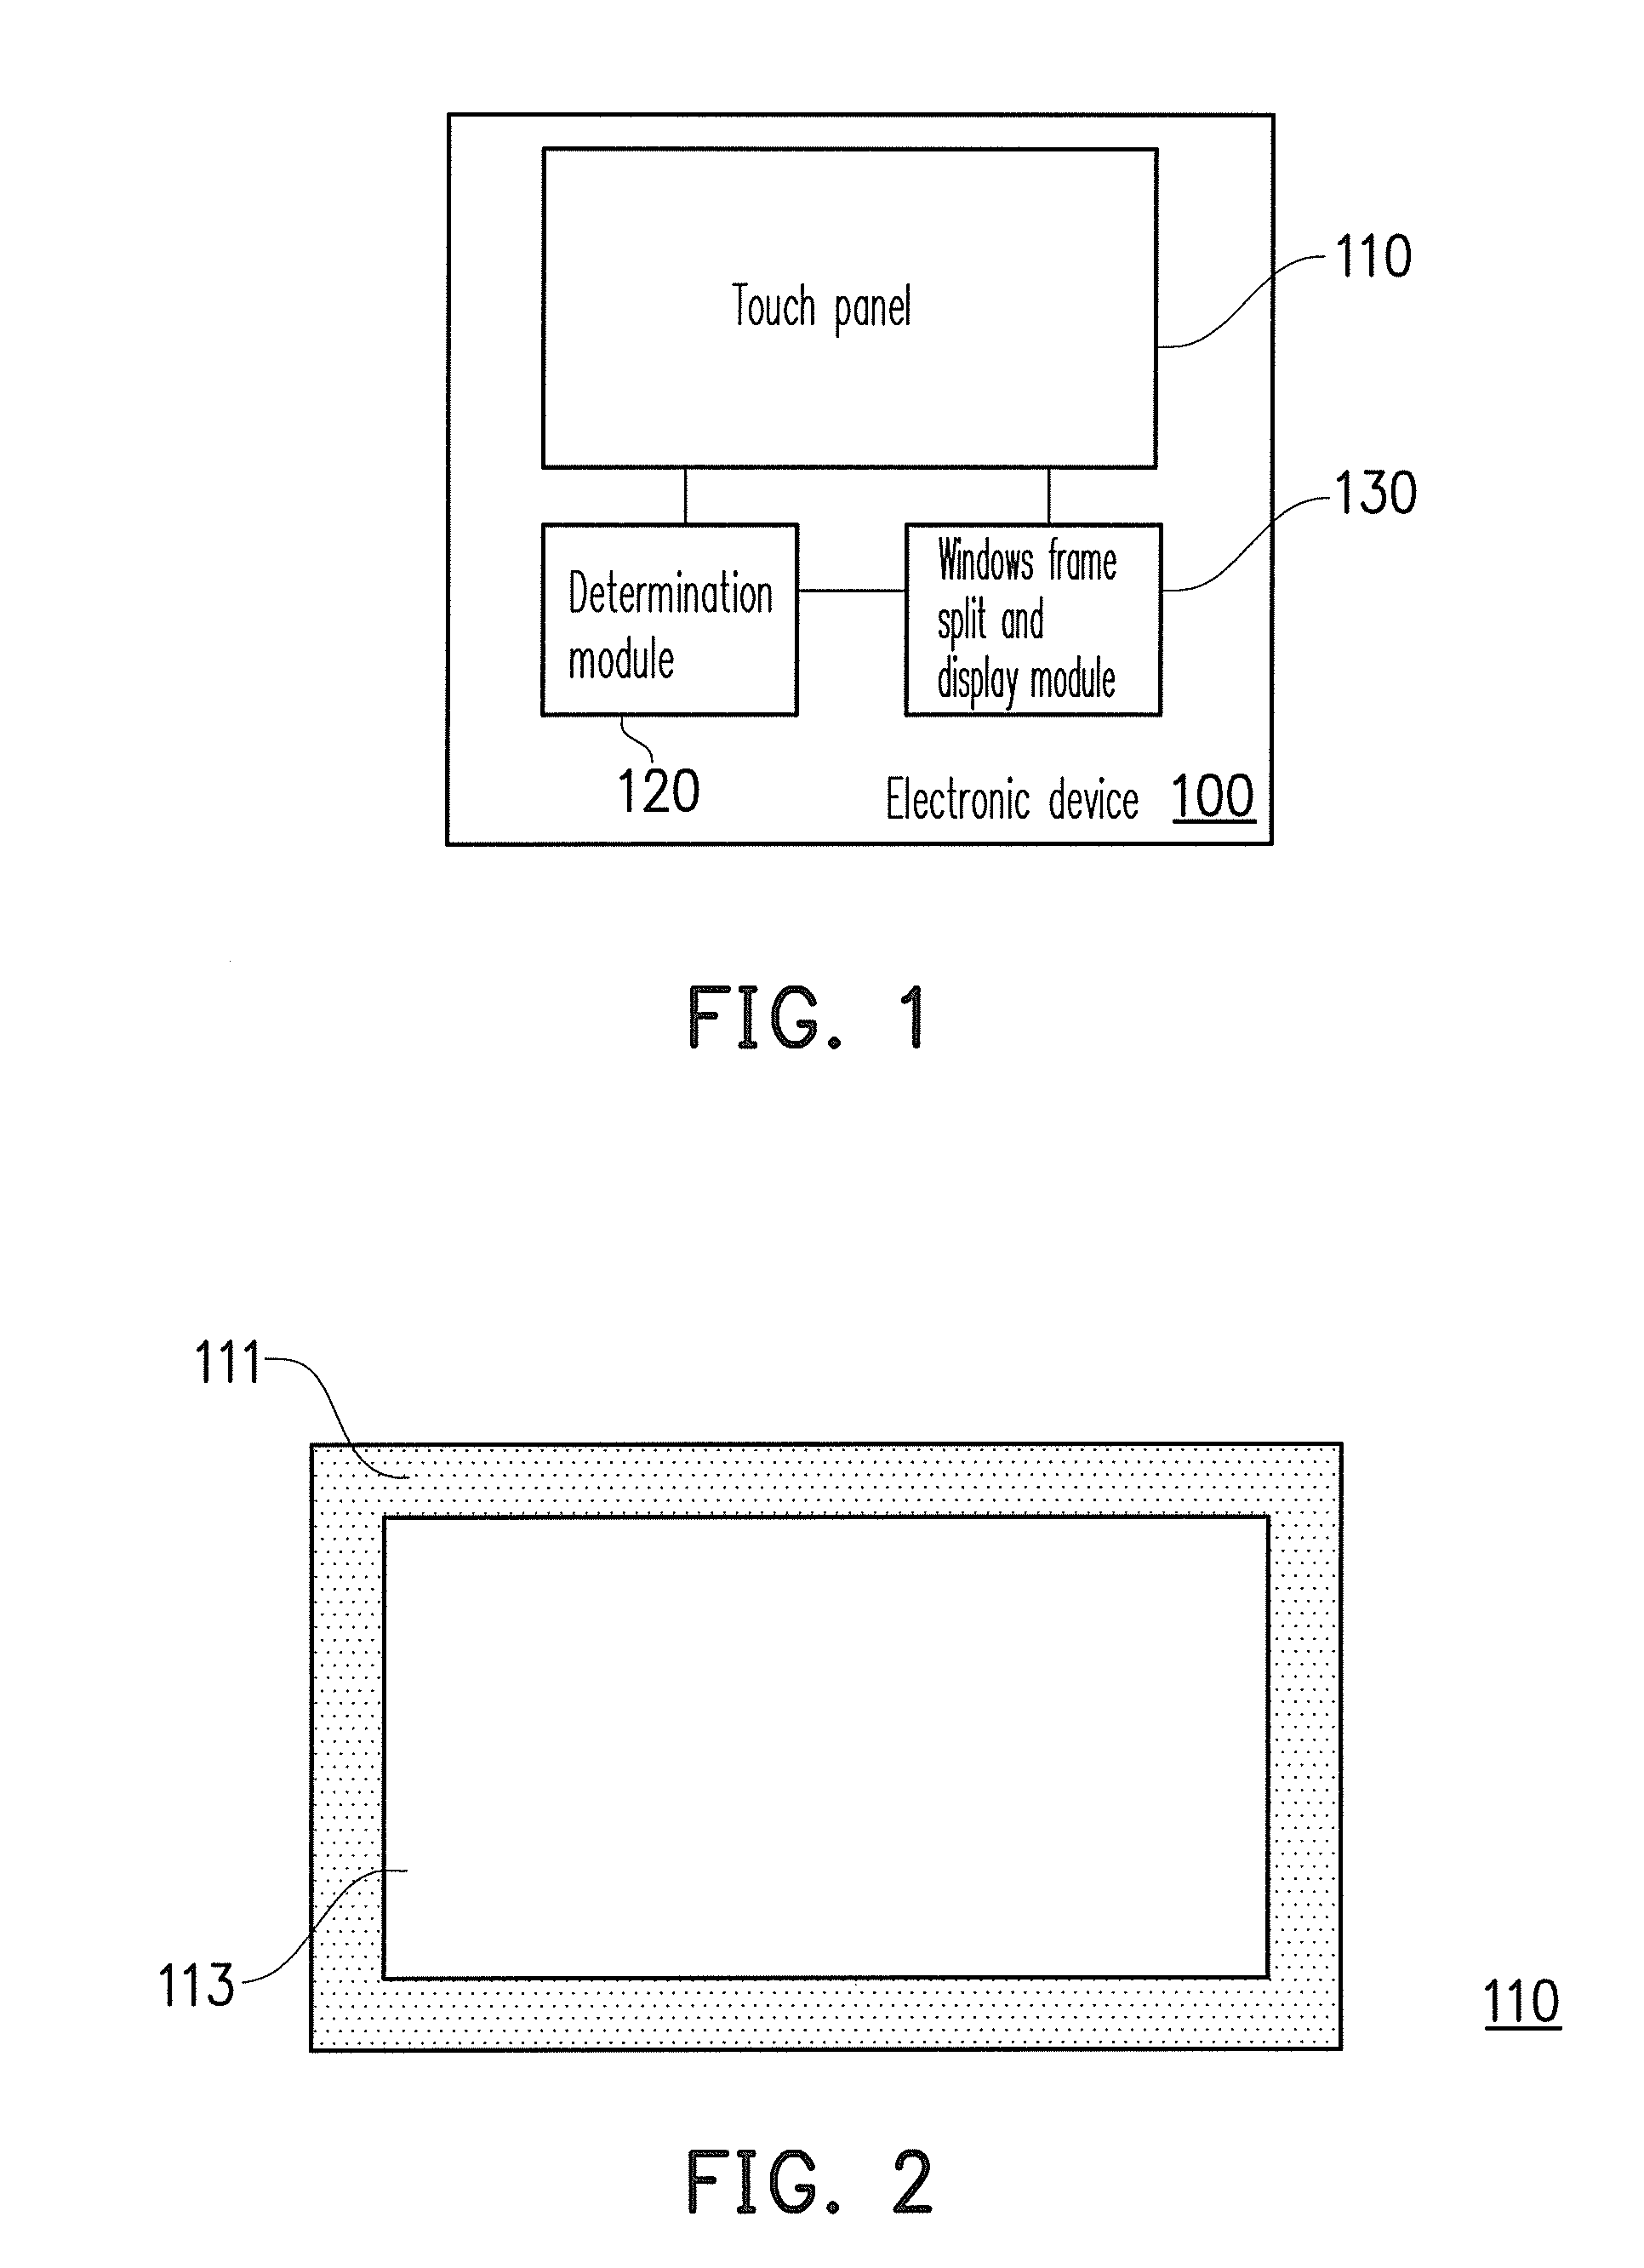 Method for generating multiple windows frames, electronic device thereof, and computer program product using the method